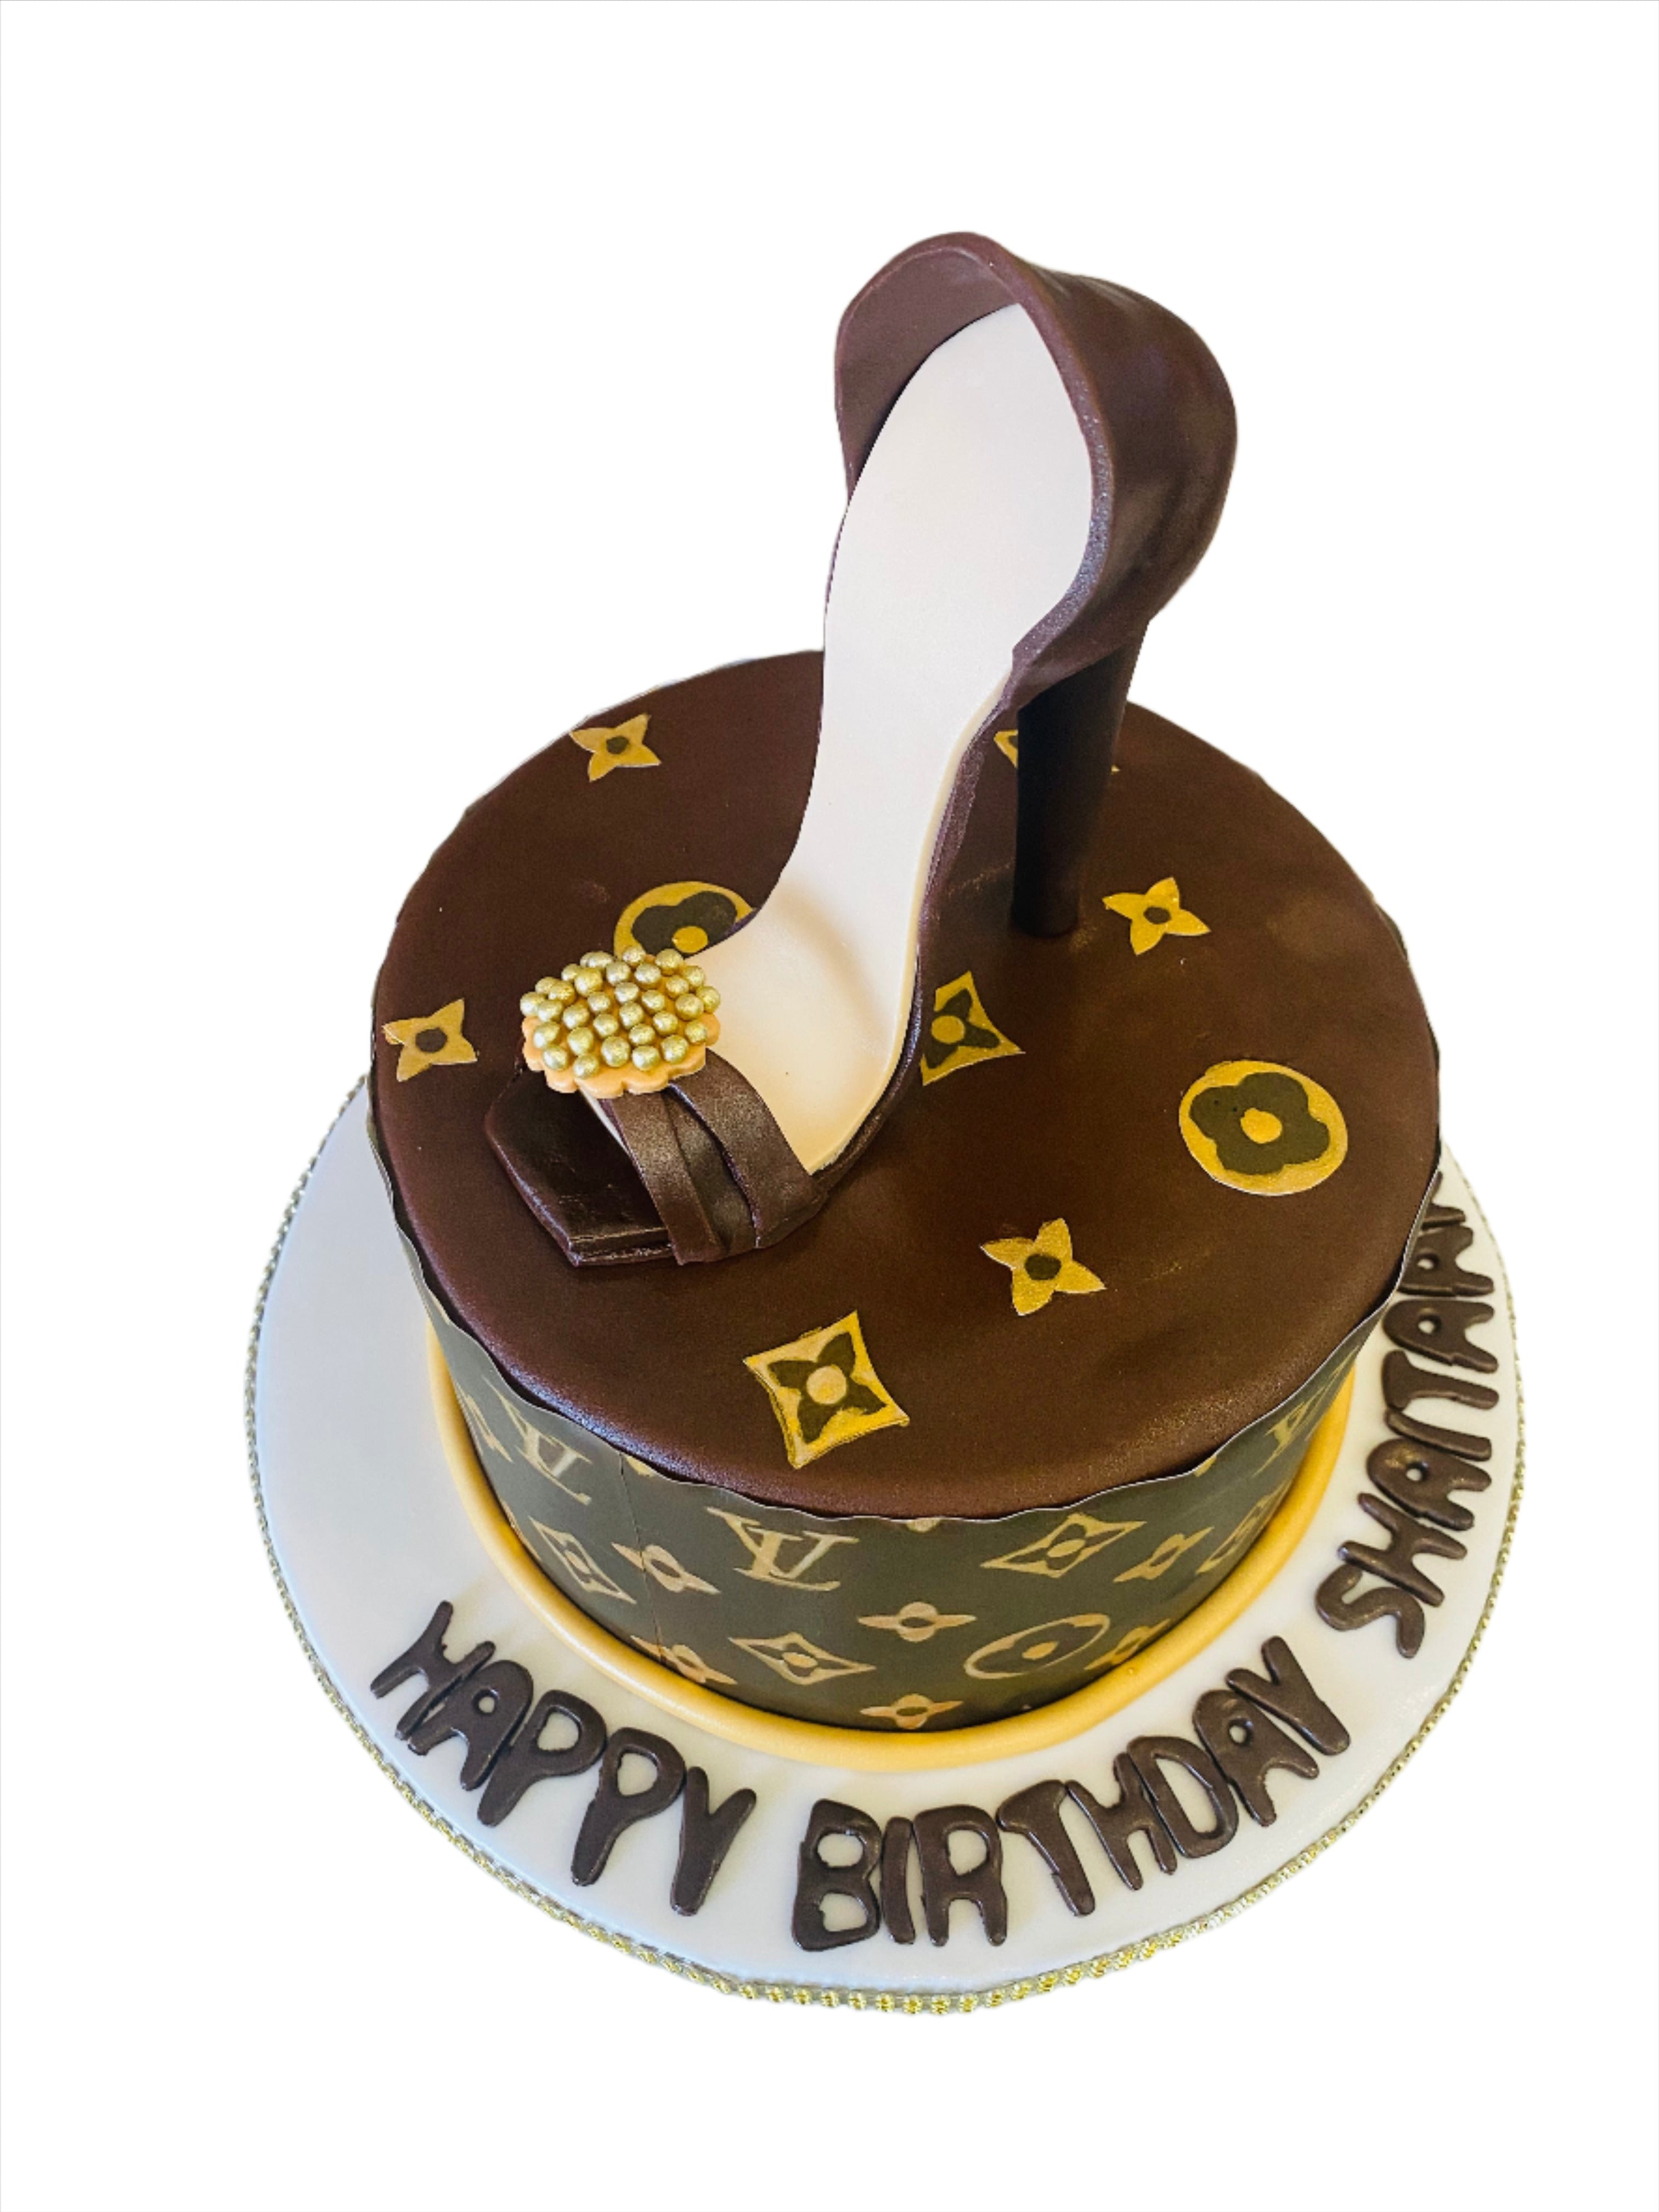 louis vuitton cake  Louis vuitton cake, Cake decorating with fondant, Cool birthday  cakes